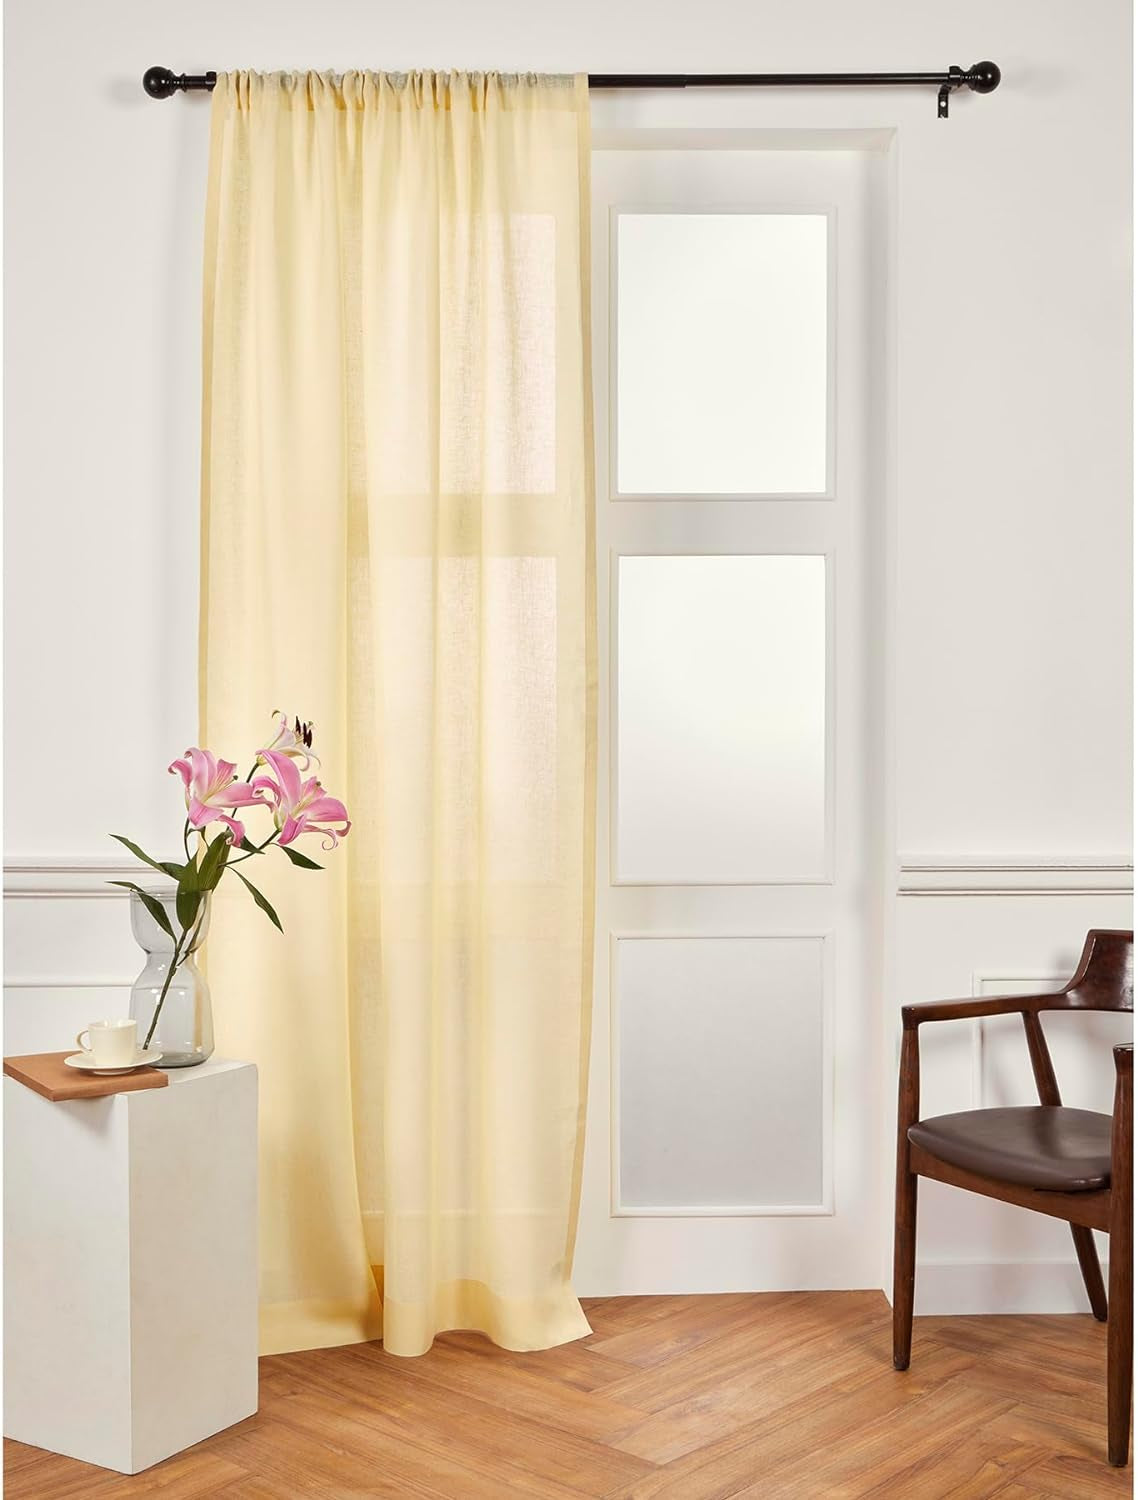 Solino Home Linen Sheer Curtain – 52 X 45 Inch Light Natural Rod Pocket Window Panel – 100% Pure Natural Fabric Curtain for Living Room, Indoor, Outdoor – Handcrafted from European Flax  Solino Home Beige 52 X 63 Inch 